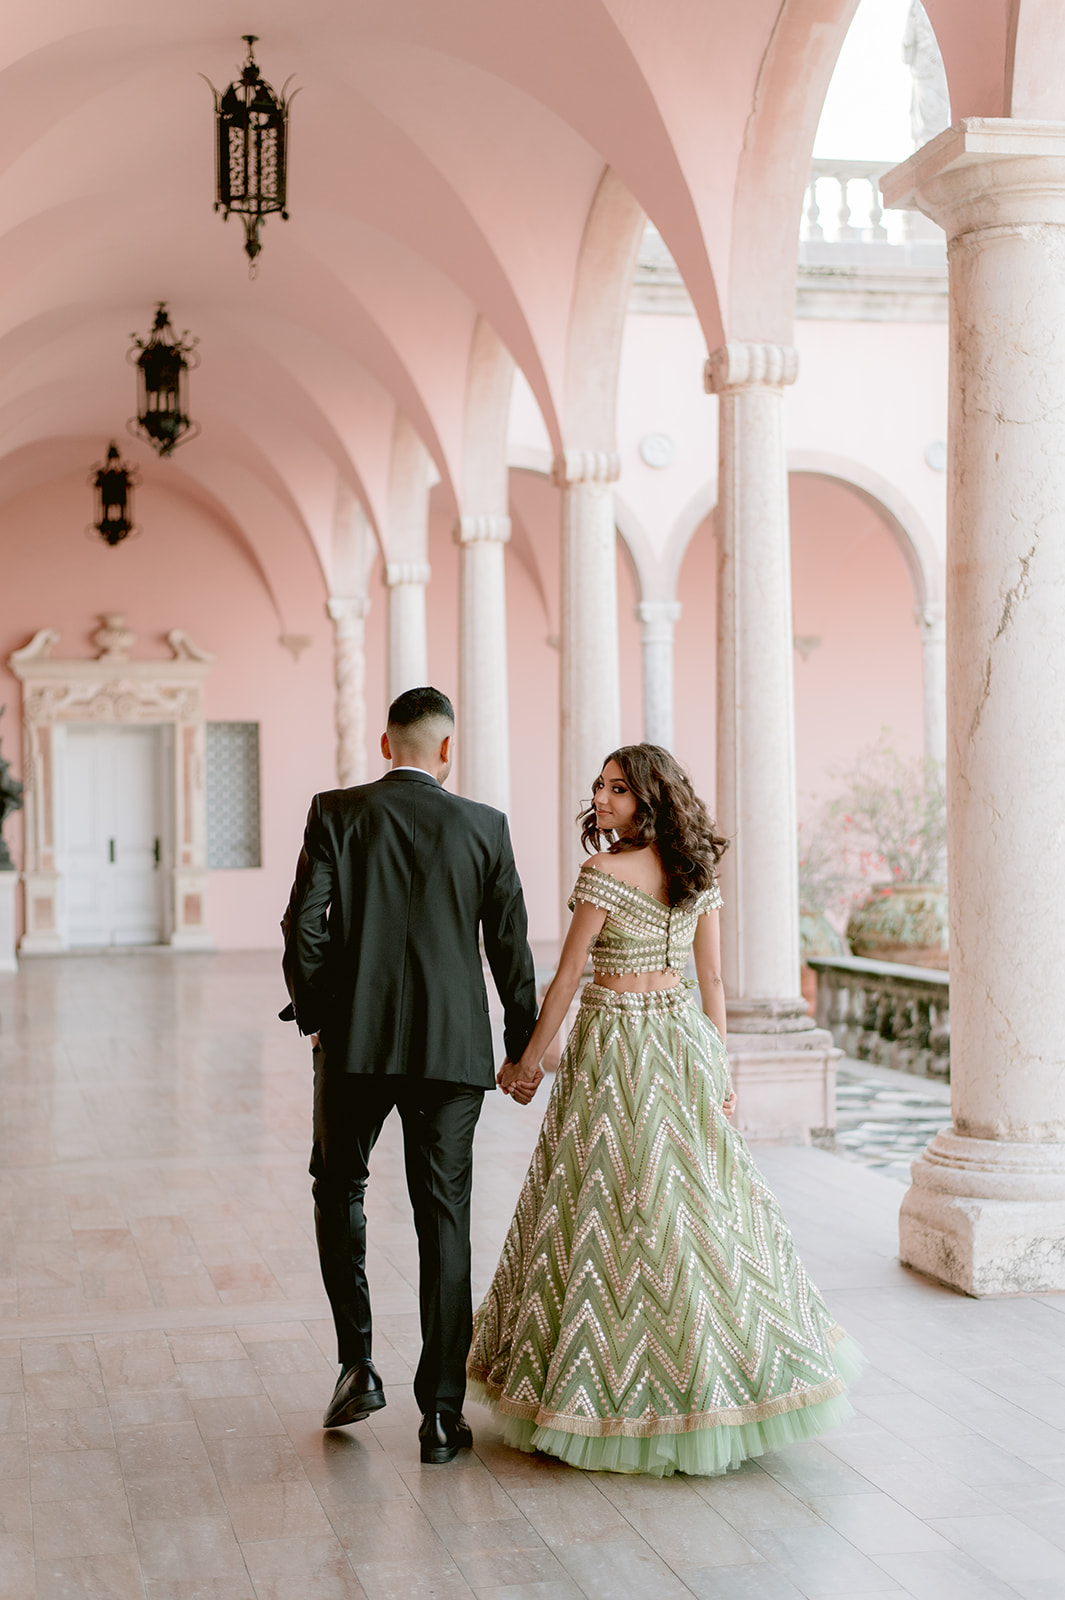 "Indian couple holding hands in front of Ca' d'Zan for their engagement shoot"
